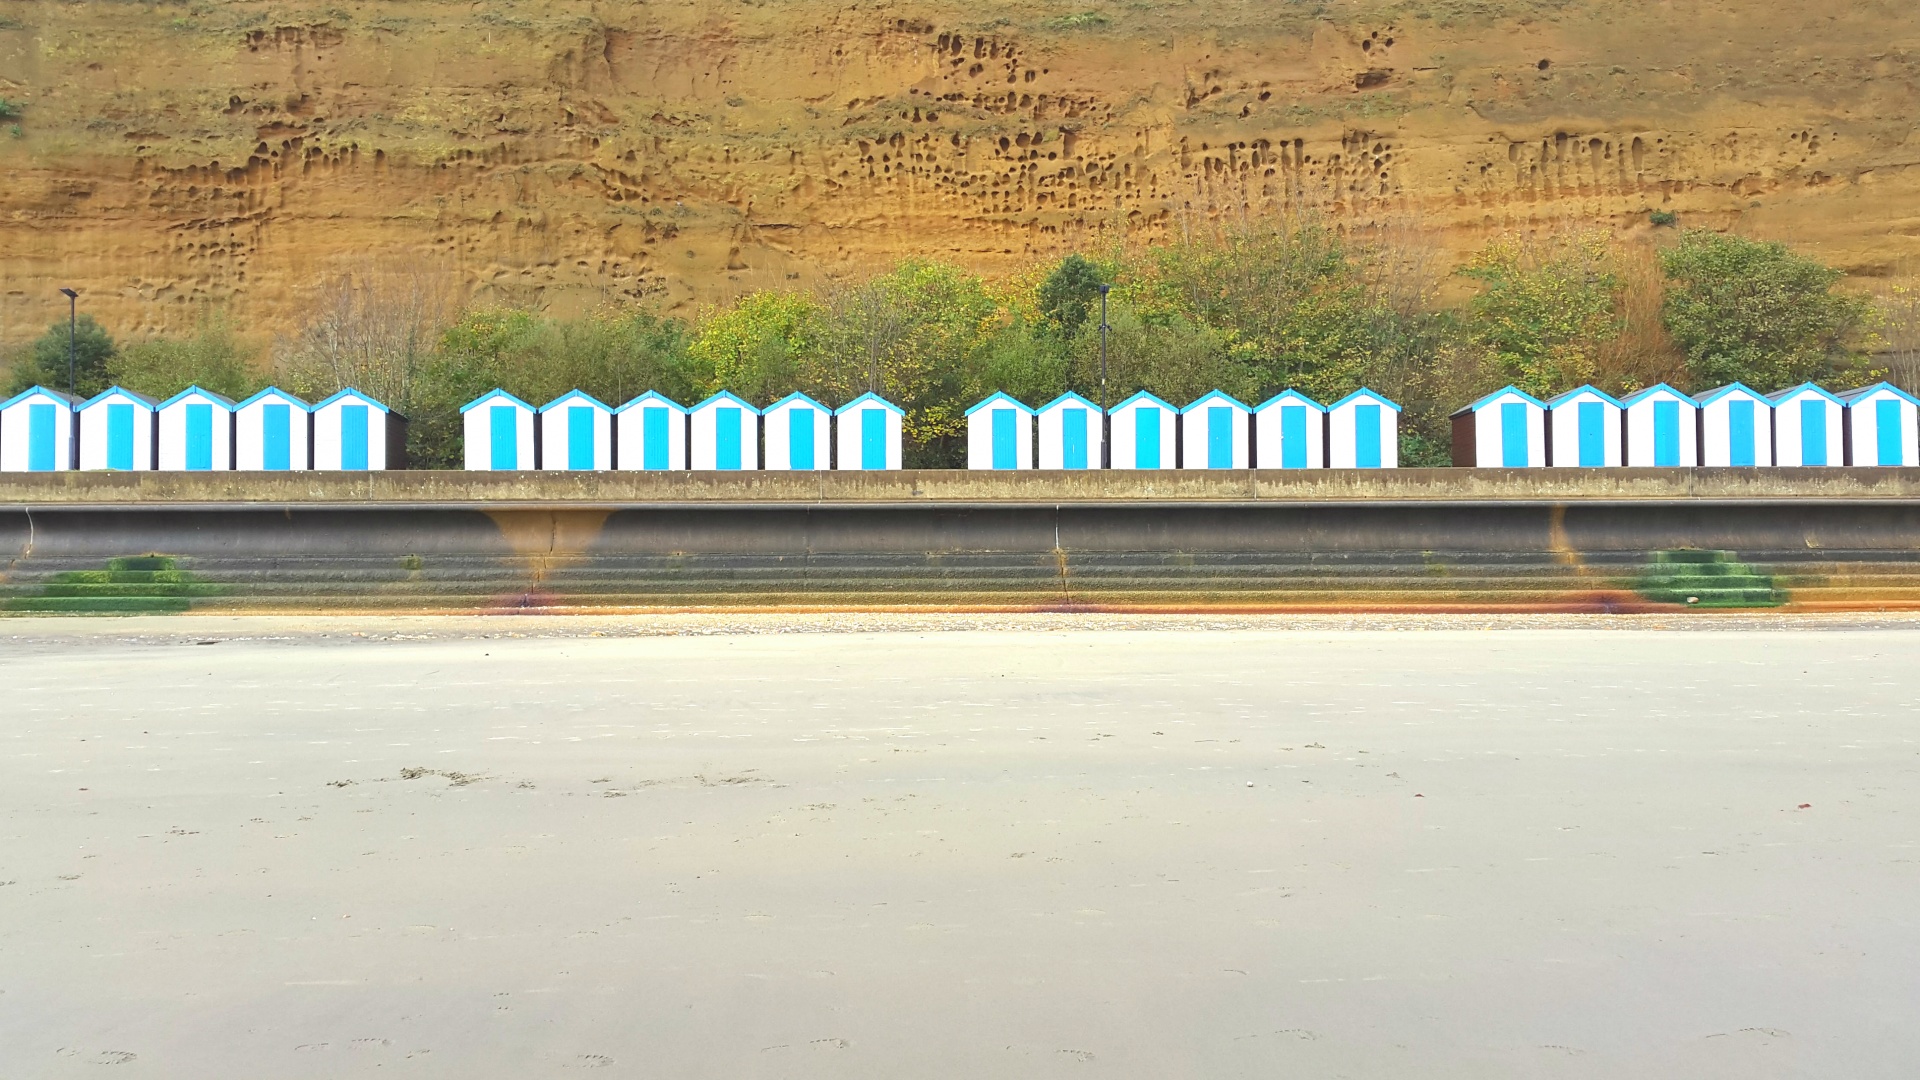 A row of white and blue beach huts